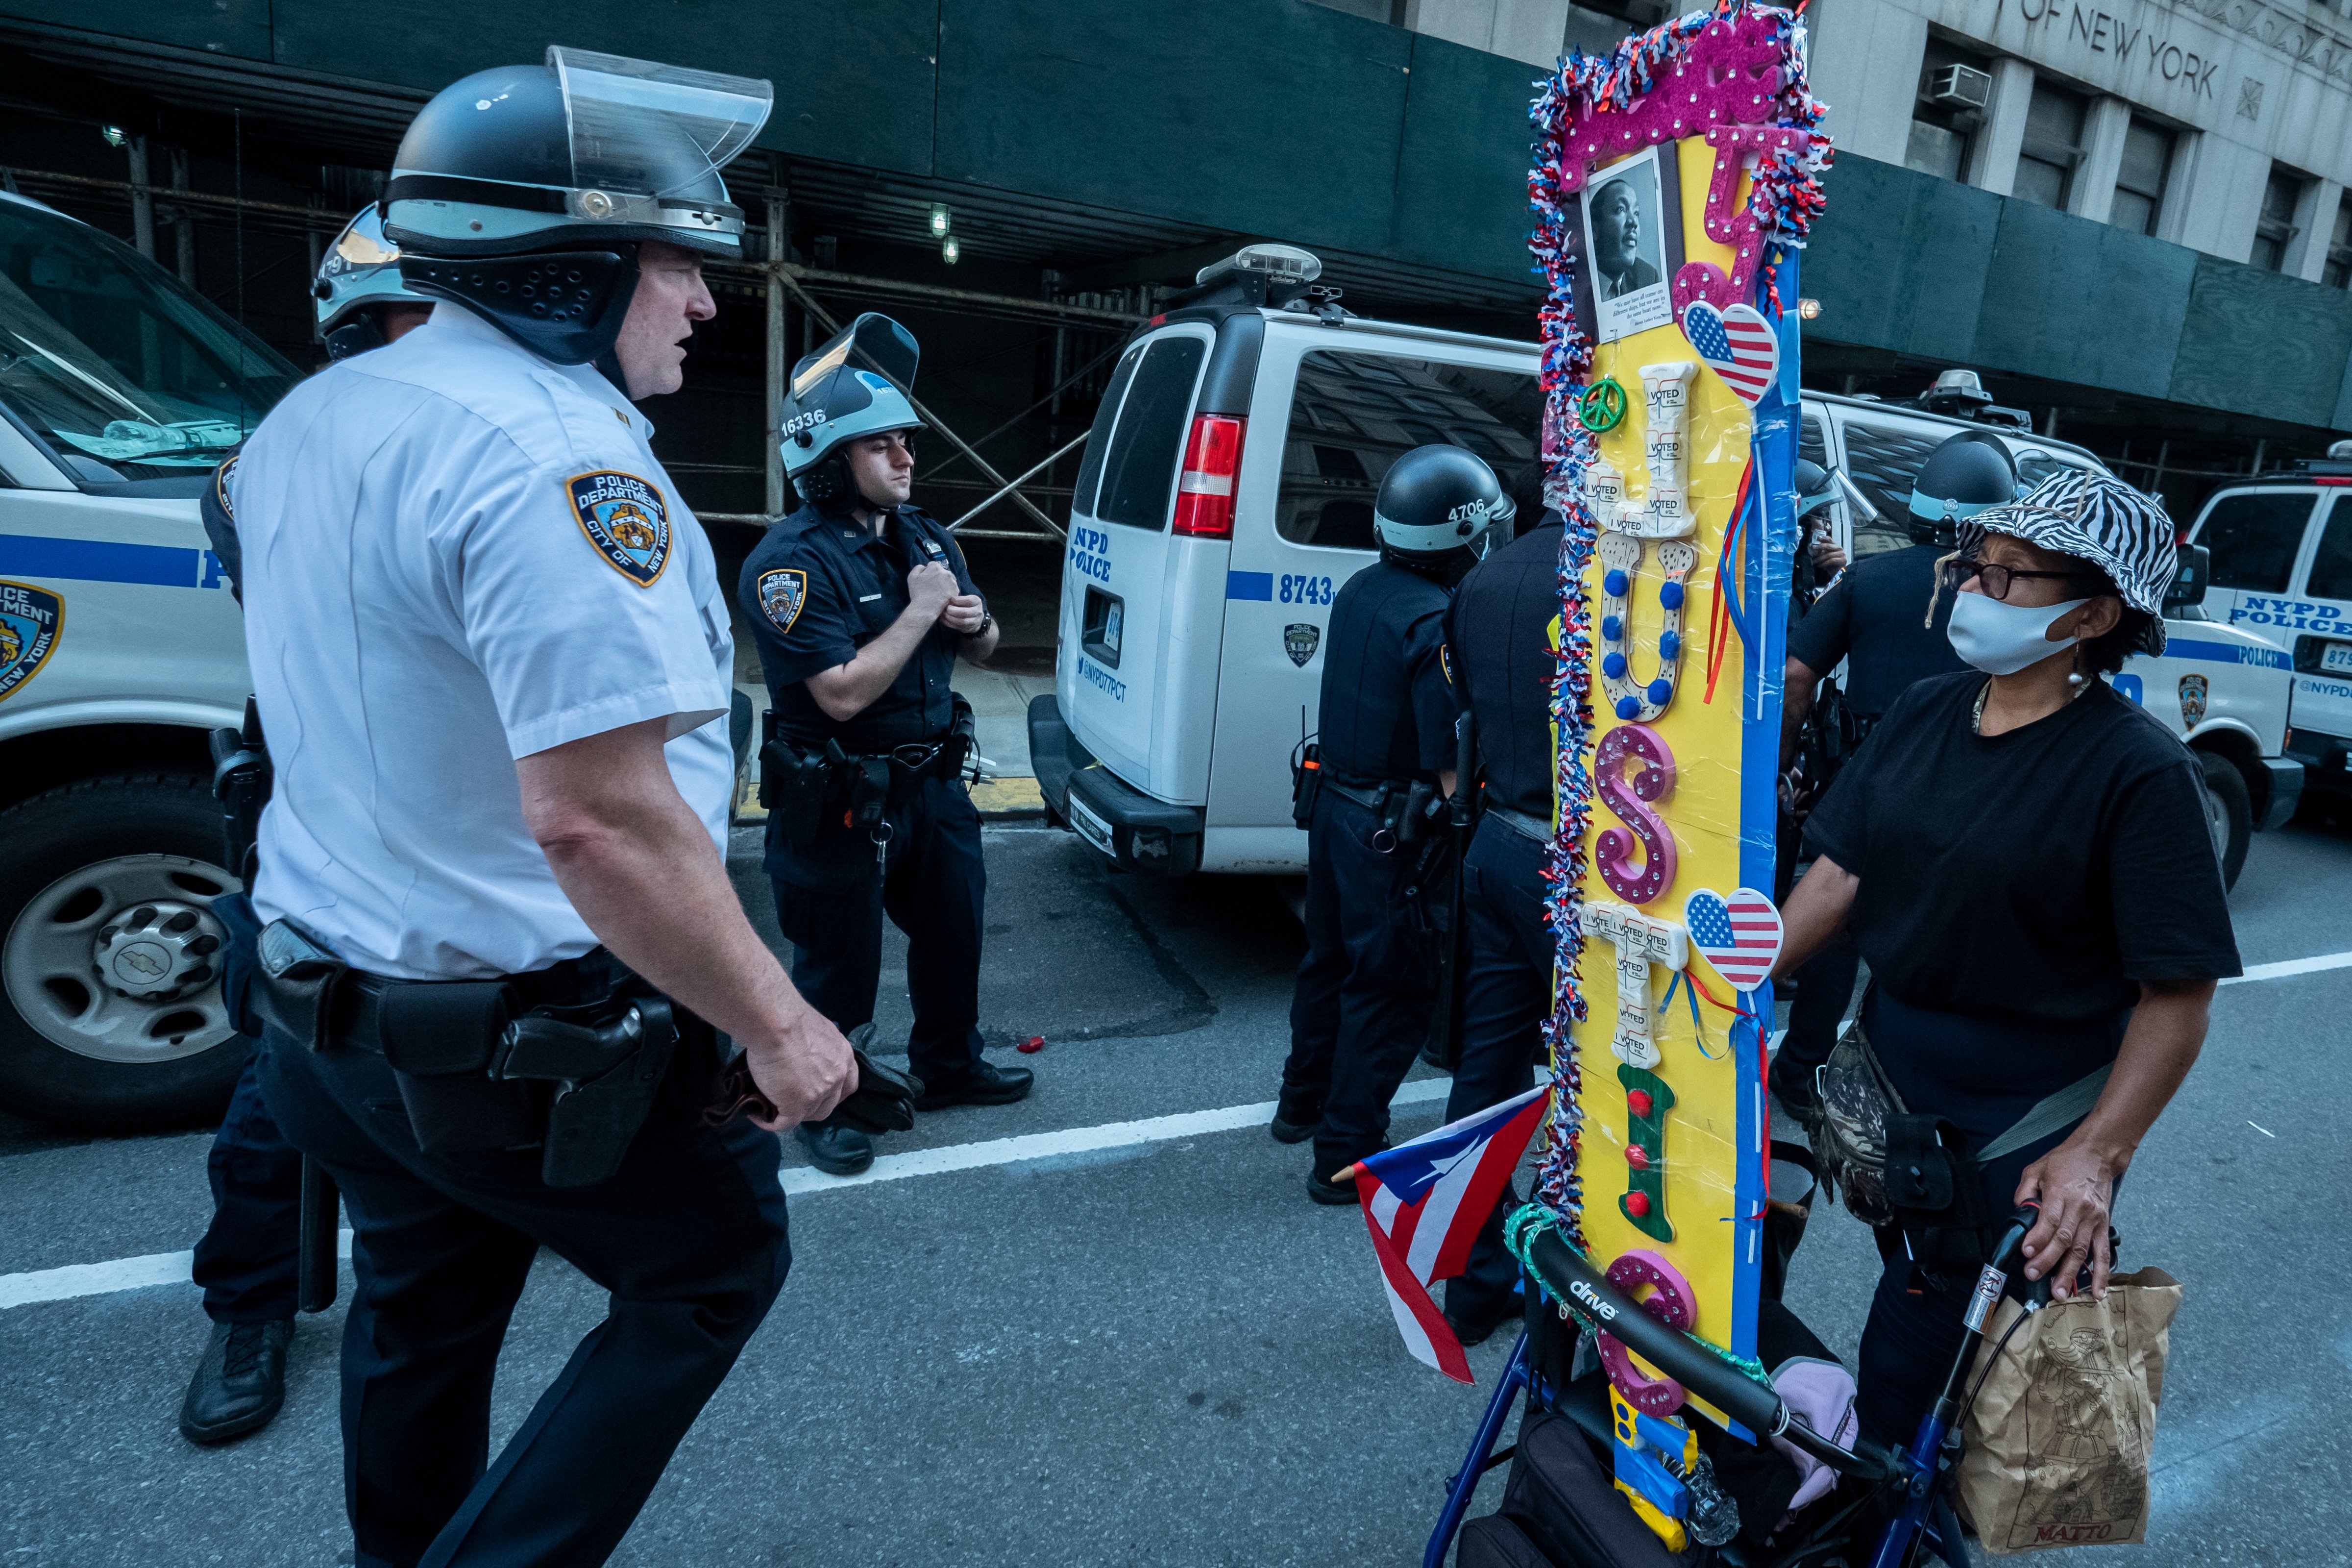 A protester wearing a mask and carting a sign that reads "Justice" passes a line of New York police on June 4, 2020. (Ira L. Black—Corbis/Getty Images)